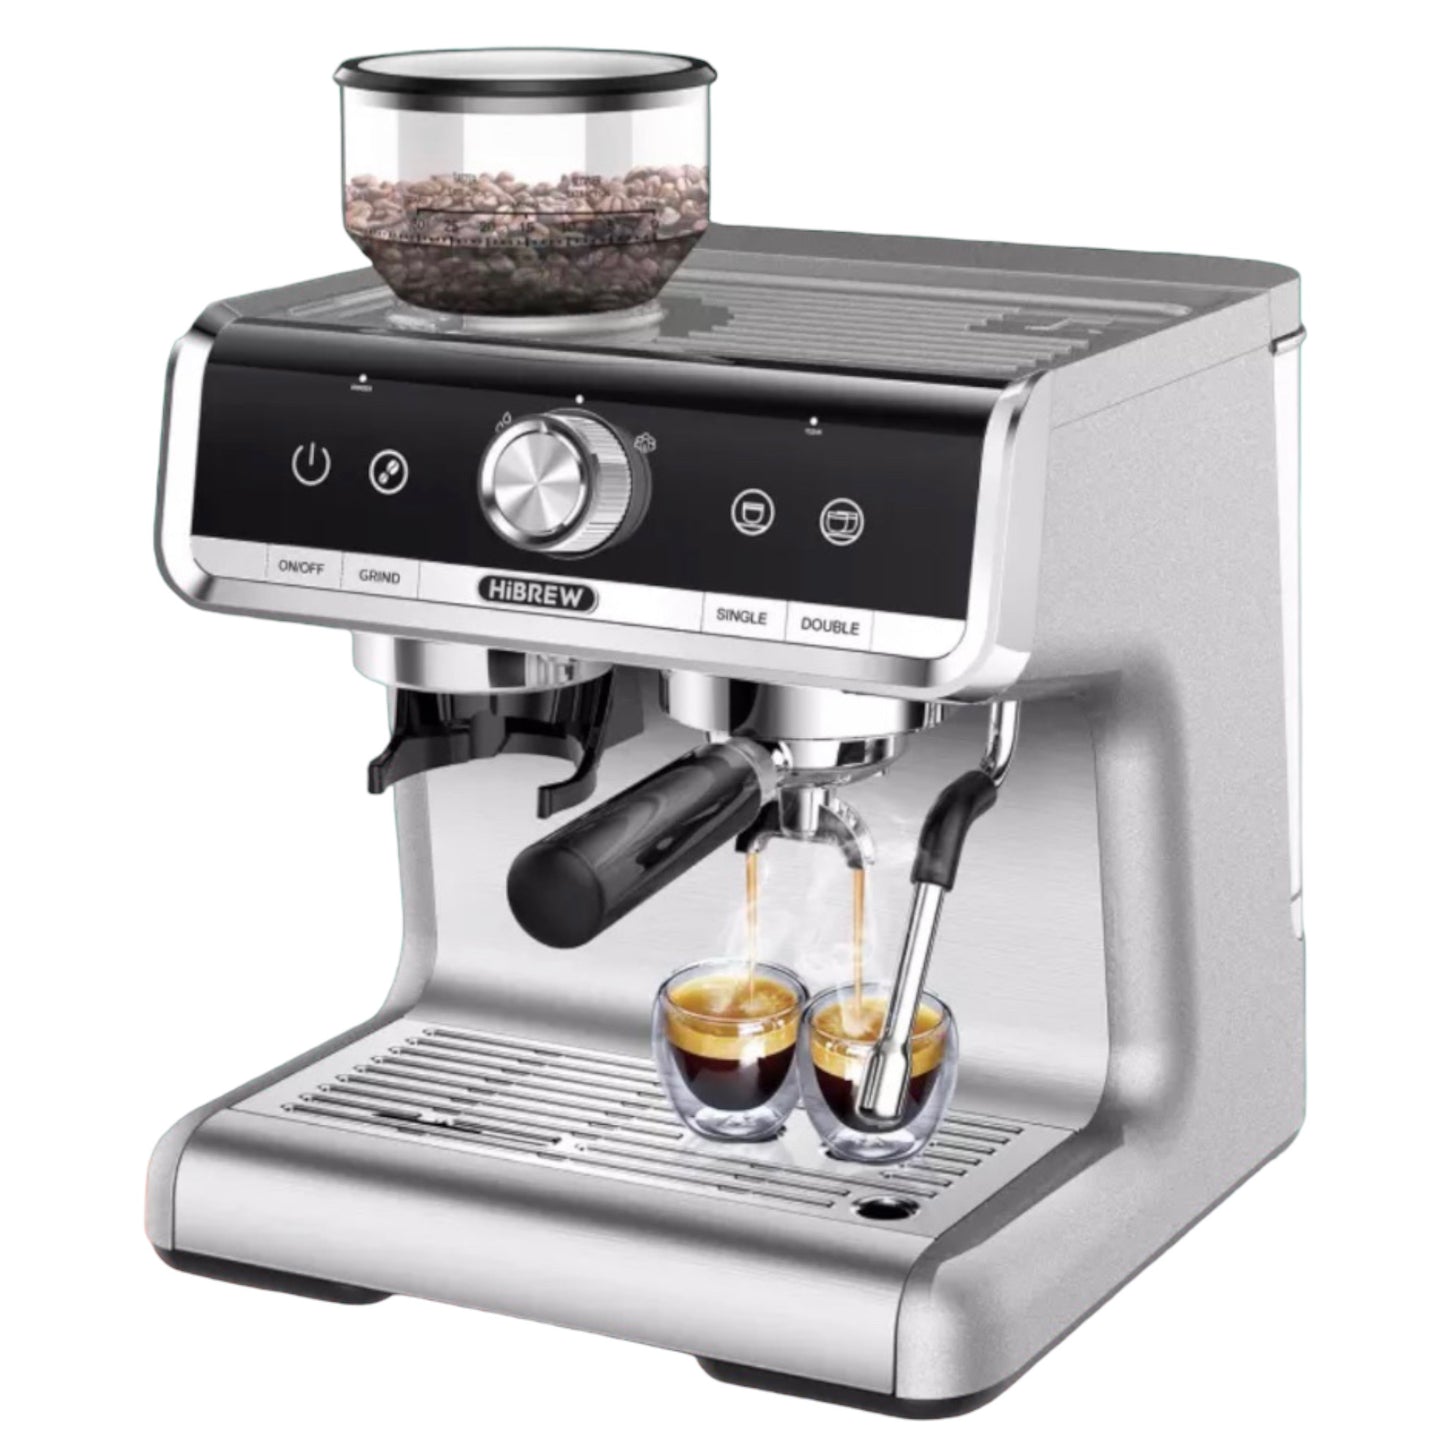 HiBREW Barista Pro 19Bar Bean to Espresso,Cafetera Commercial Level Coffee Machine with Full Kit for Cafe Hotel Restaurant H7